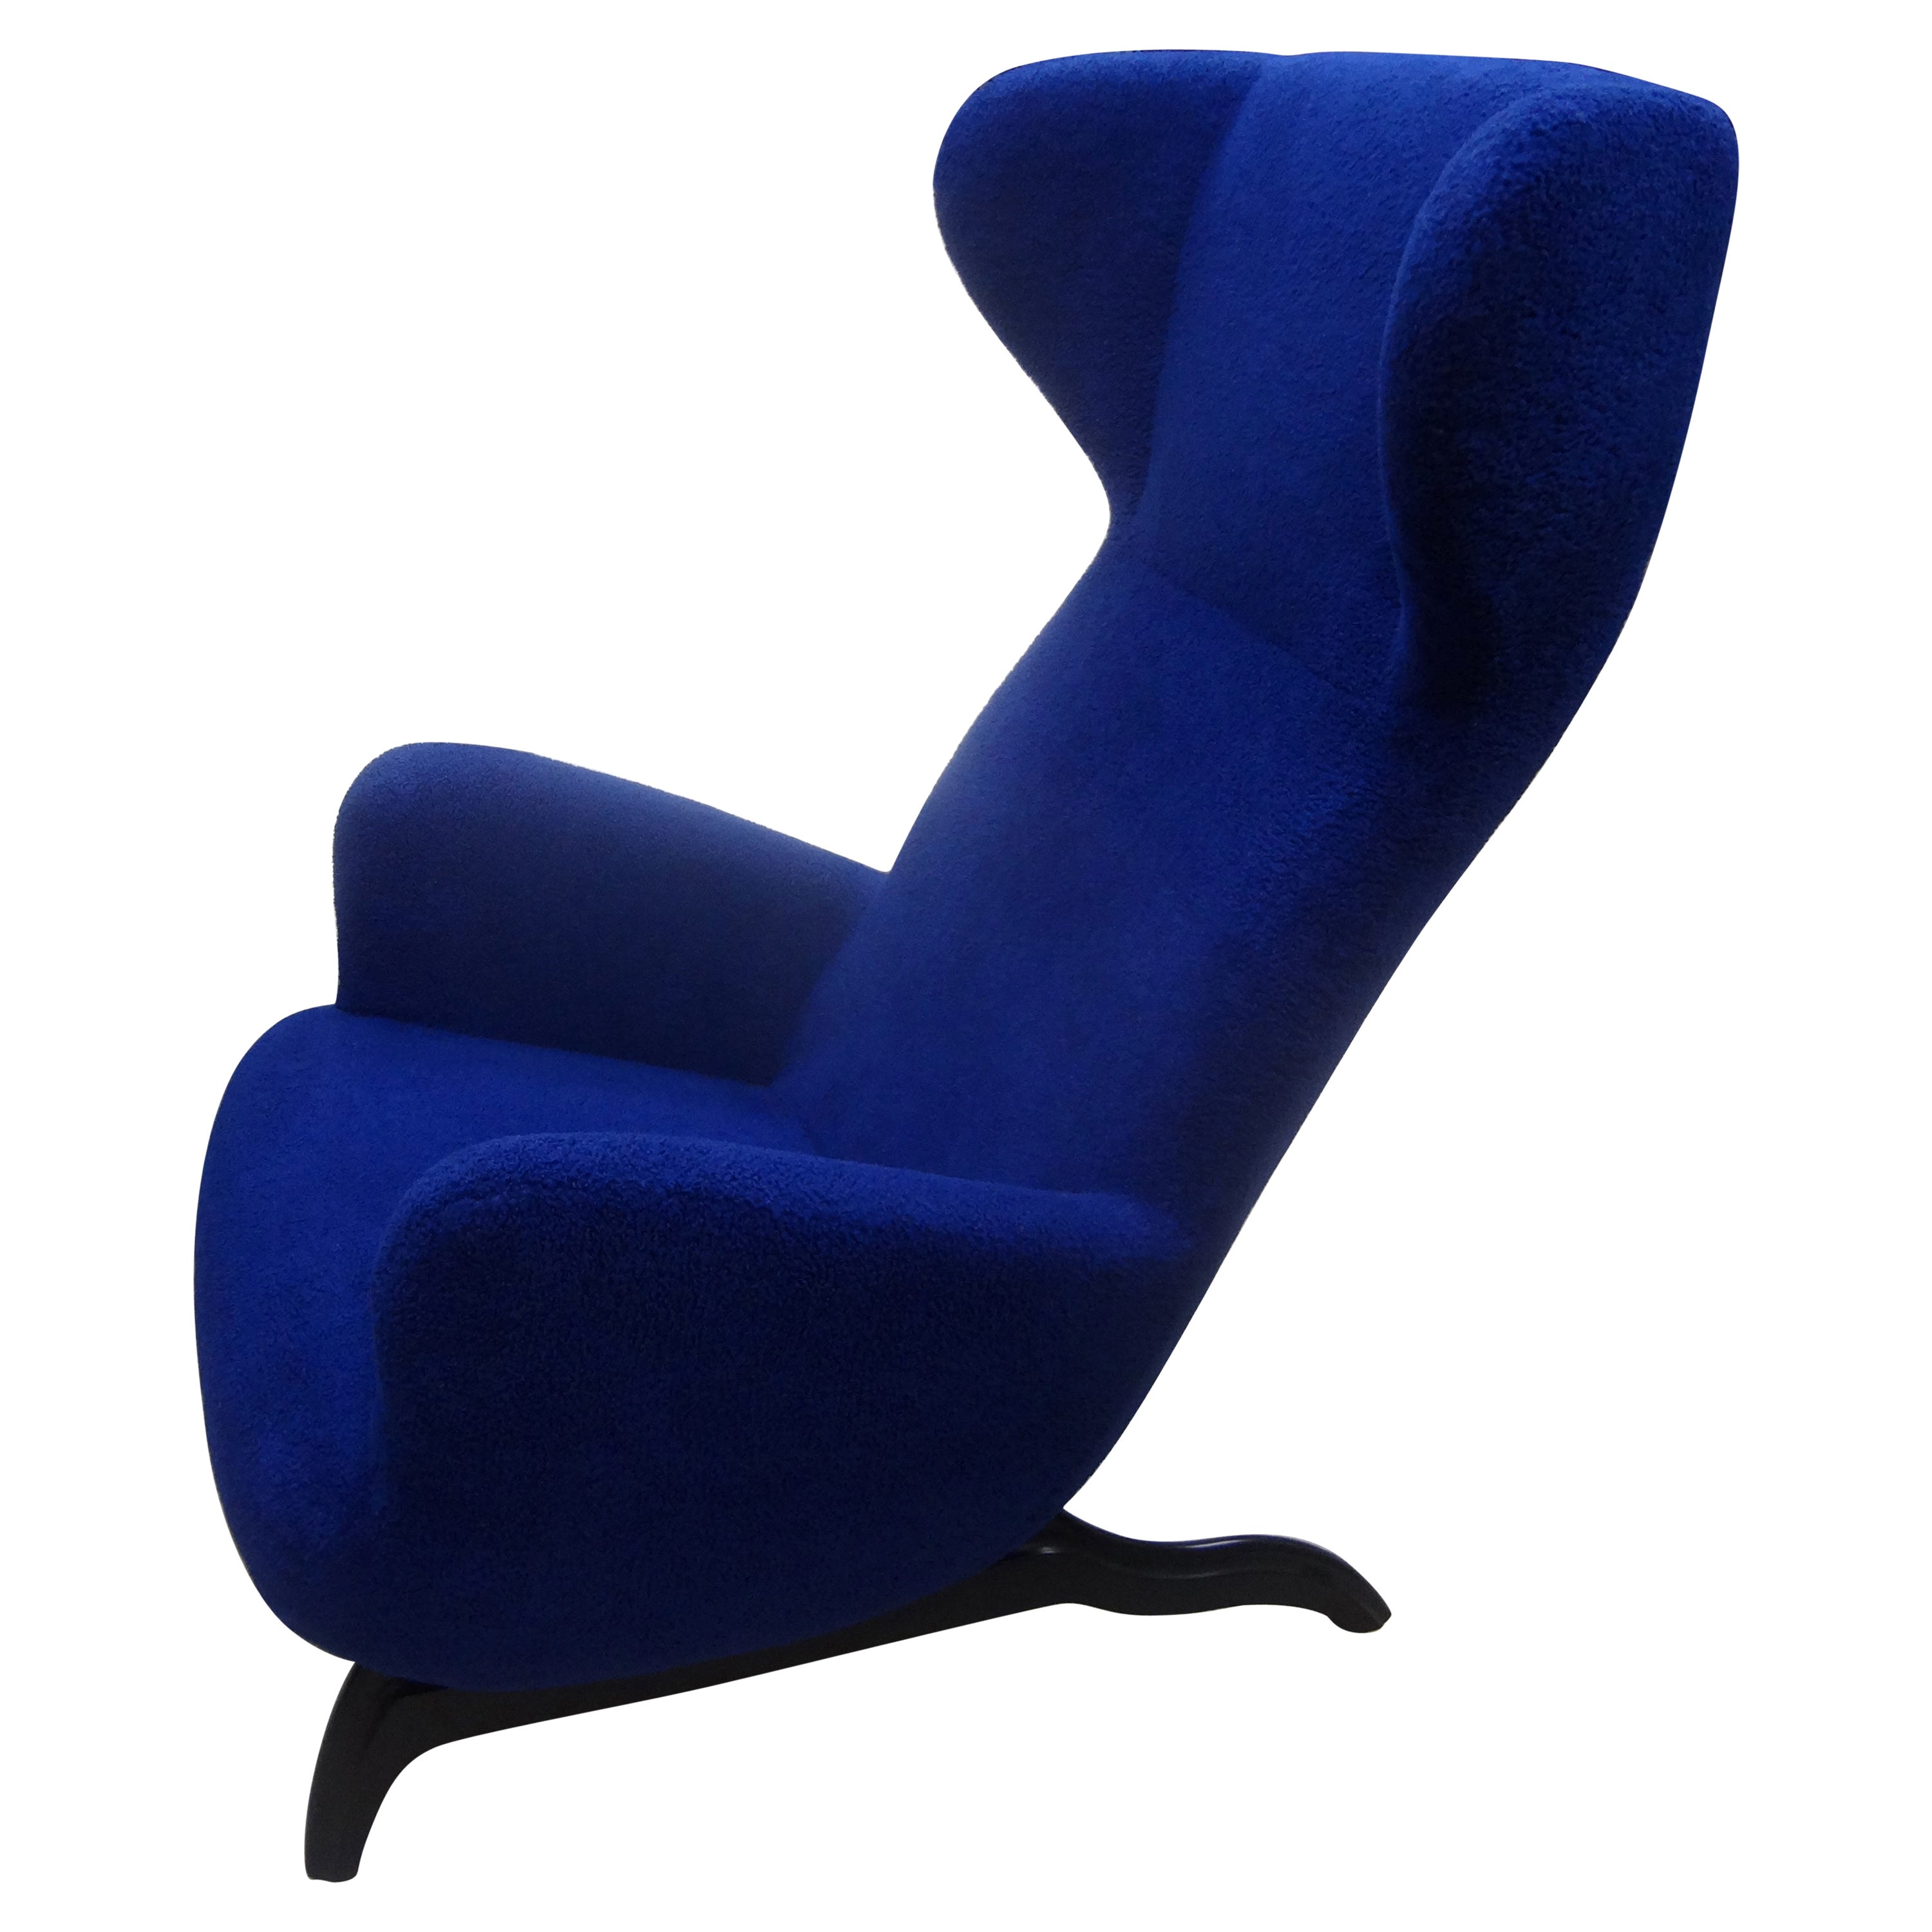 Italian Ardea Lounge Chair After A Design By Carlo Mollino  For Sale